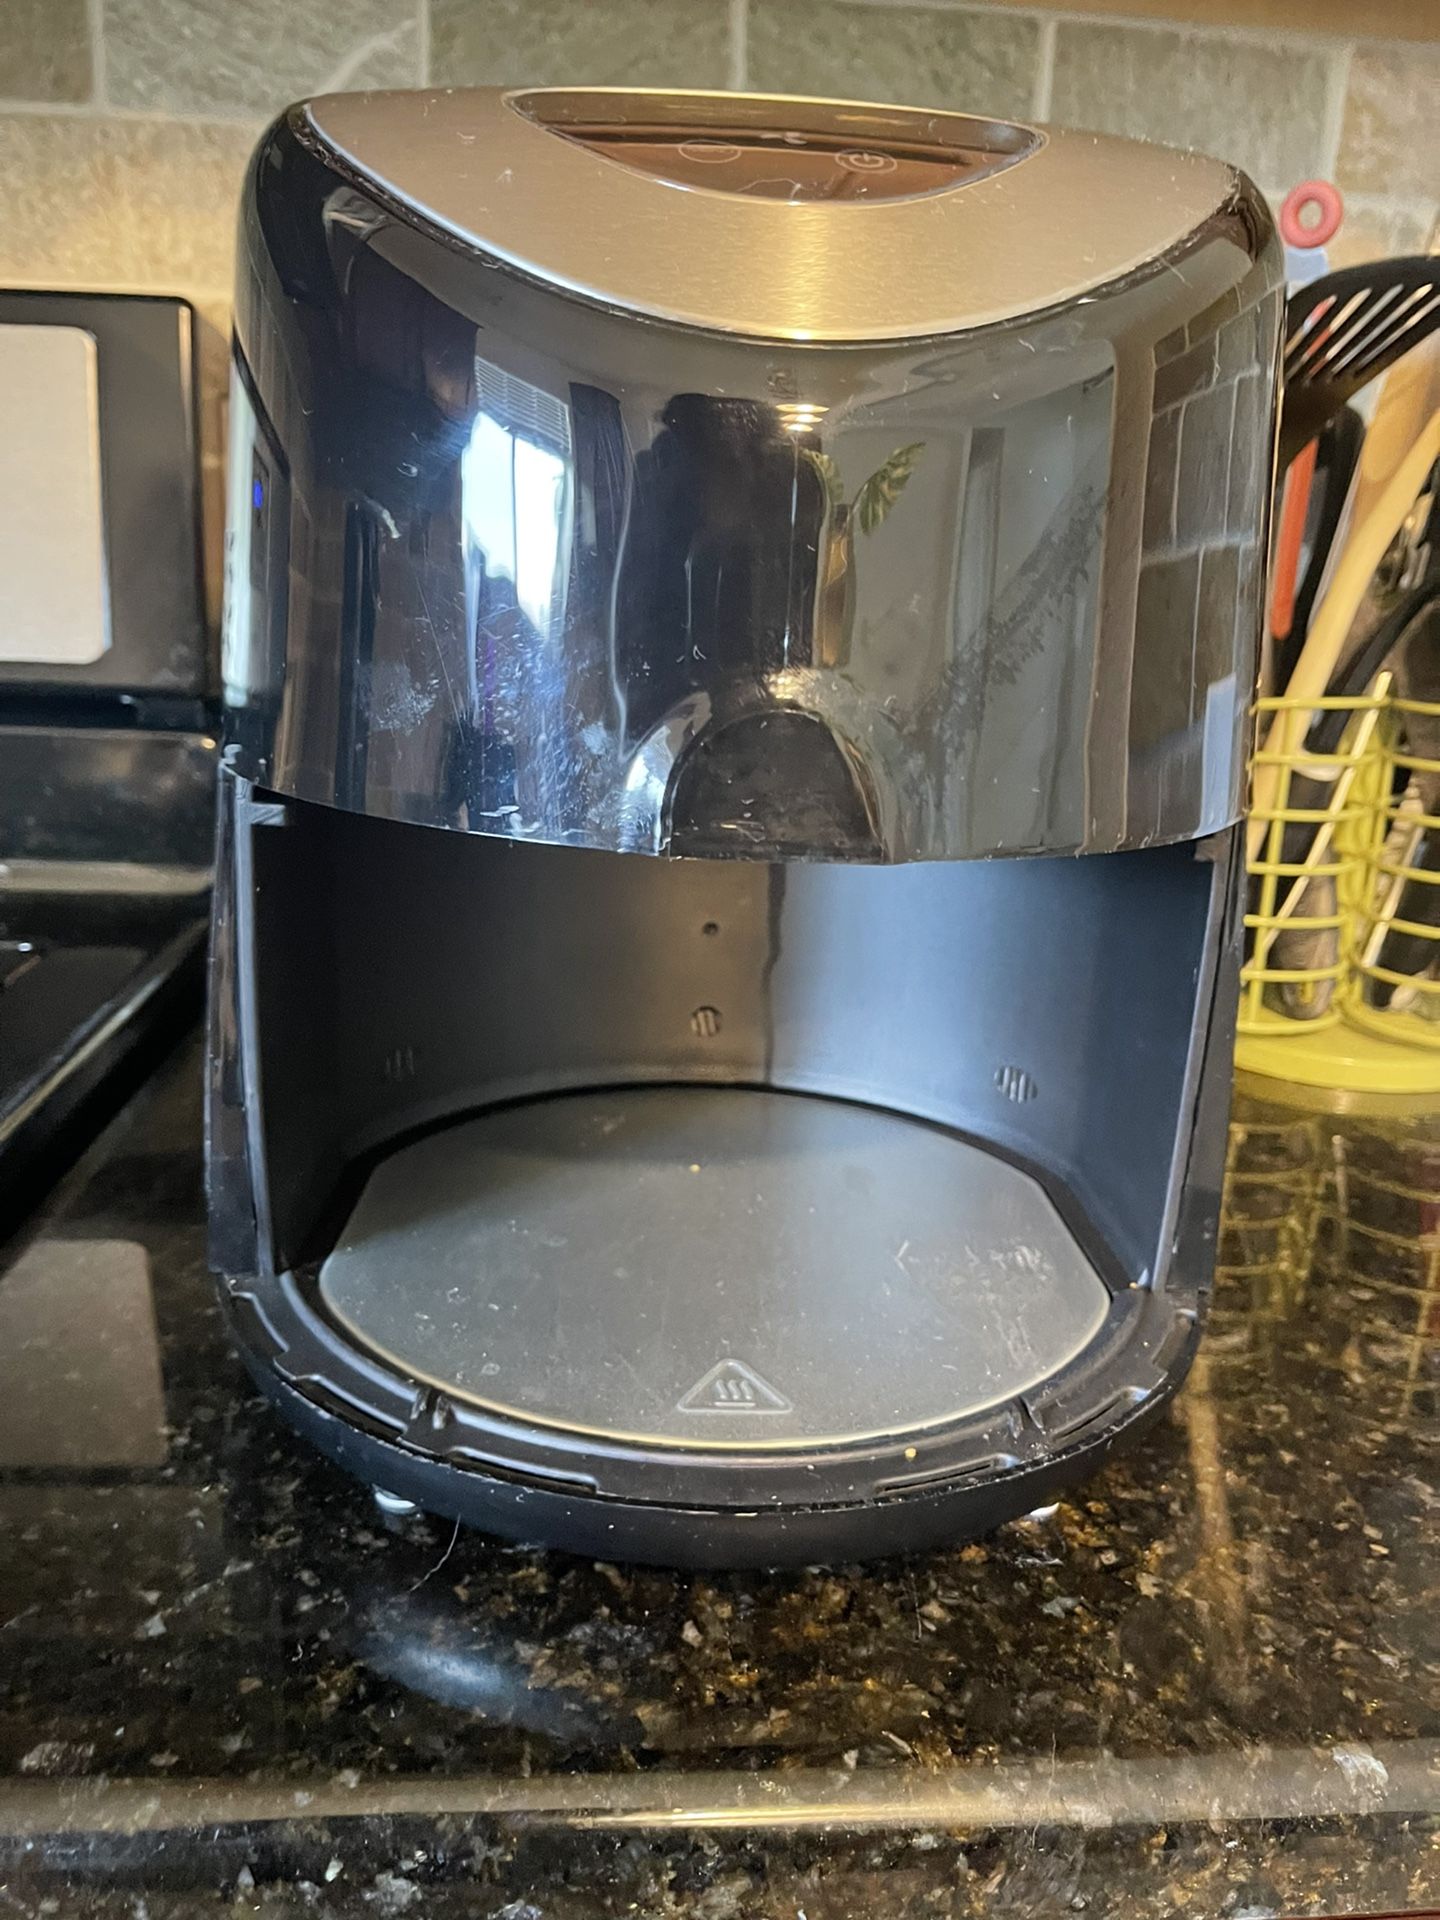 Pampered Chef Deluxe Air Fryer Model 100194 for Sale in Huffman, TX -  OfferUp